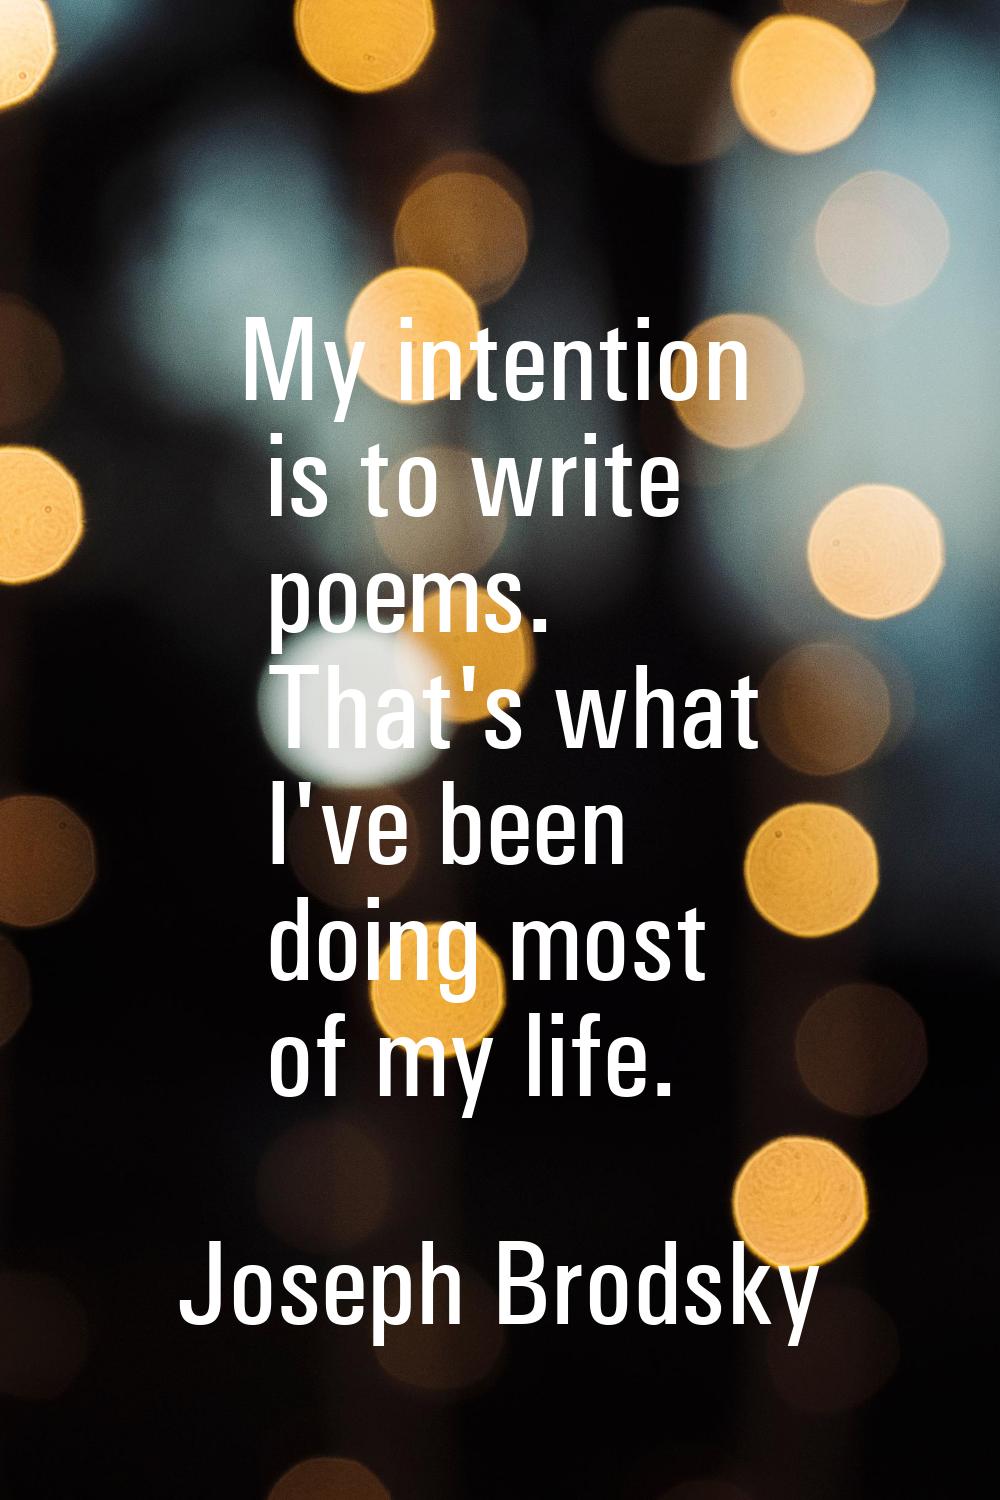 My intention is to write poems. That's what I've been doing most of my life.